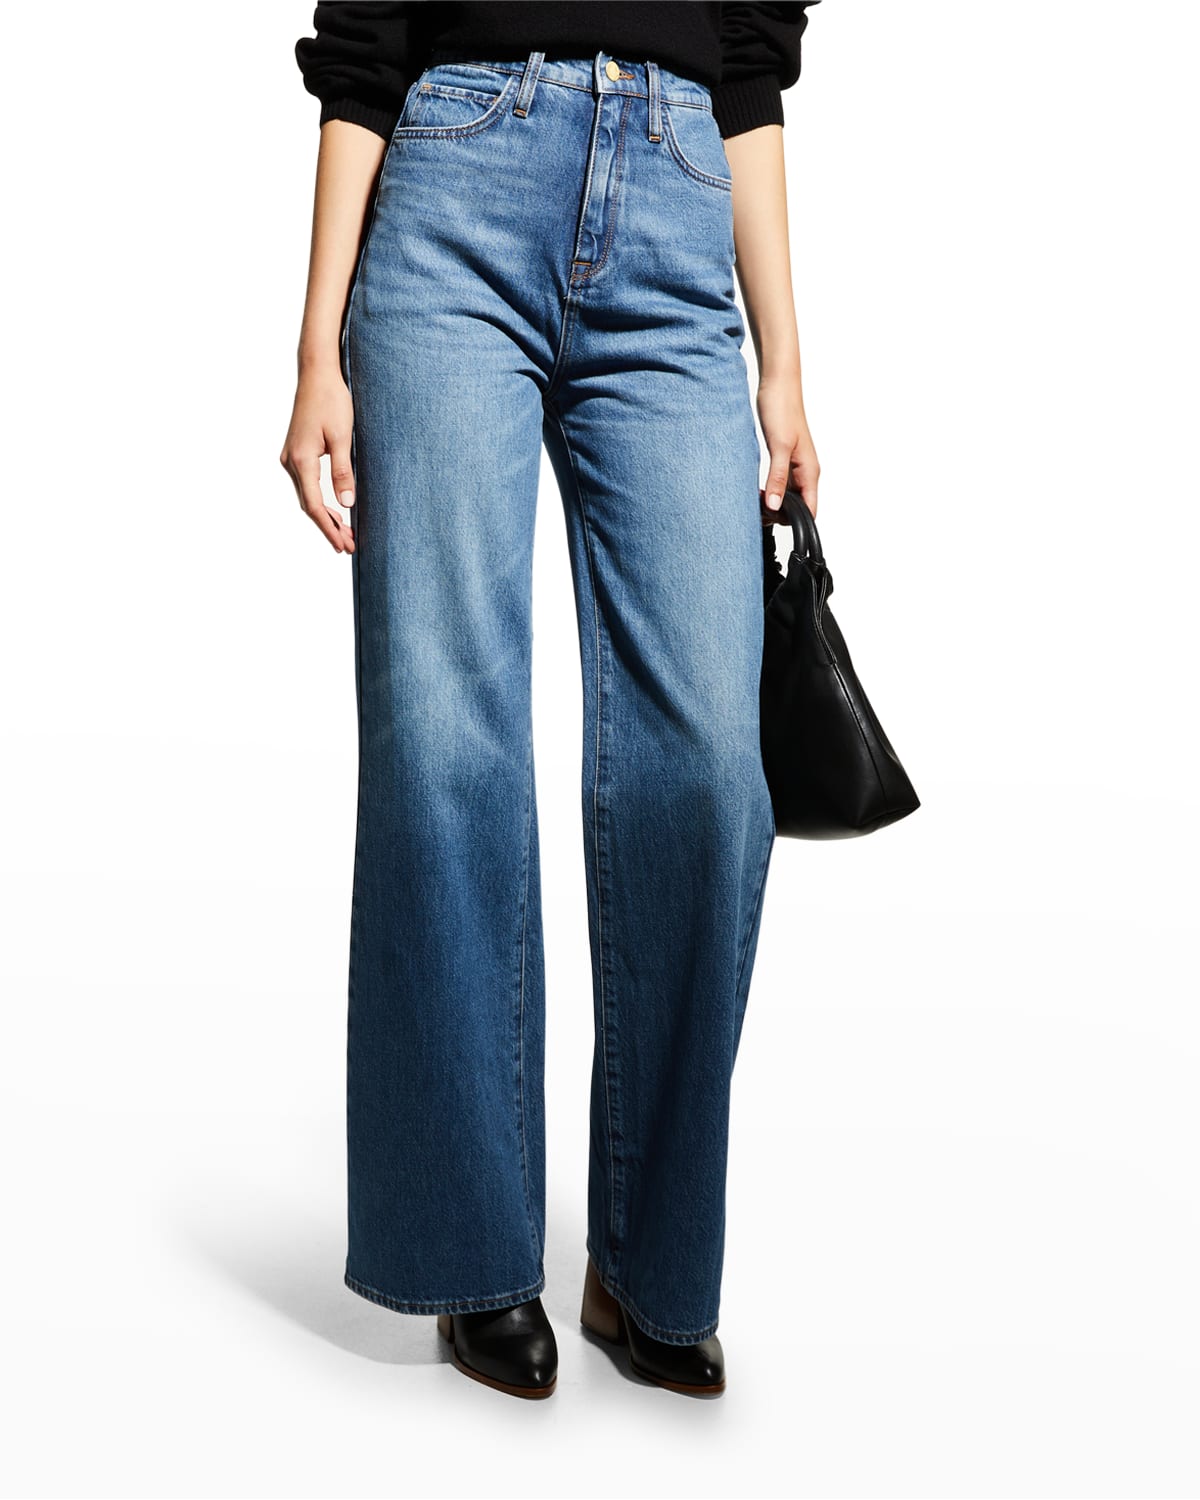 Triarchy Ms Nicks High-Rise Faded Bootcut Jeans